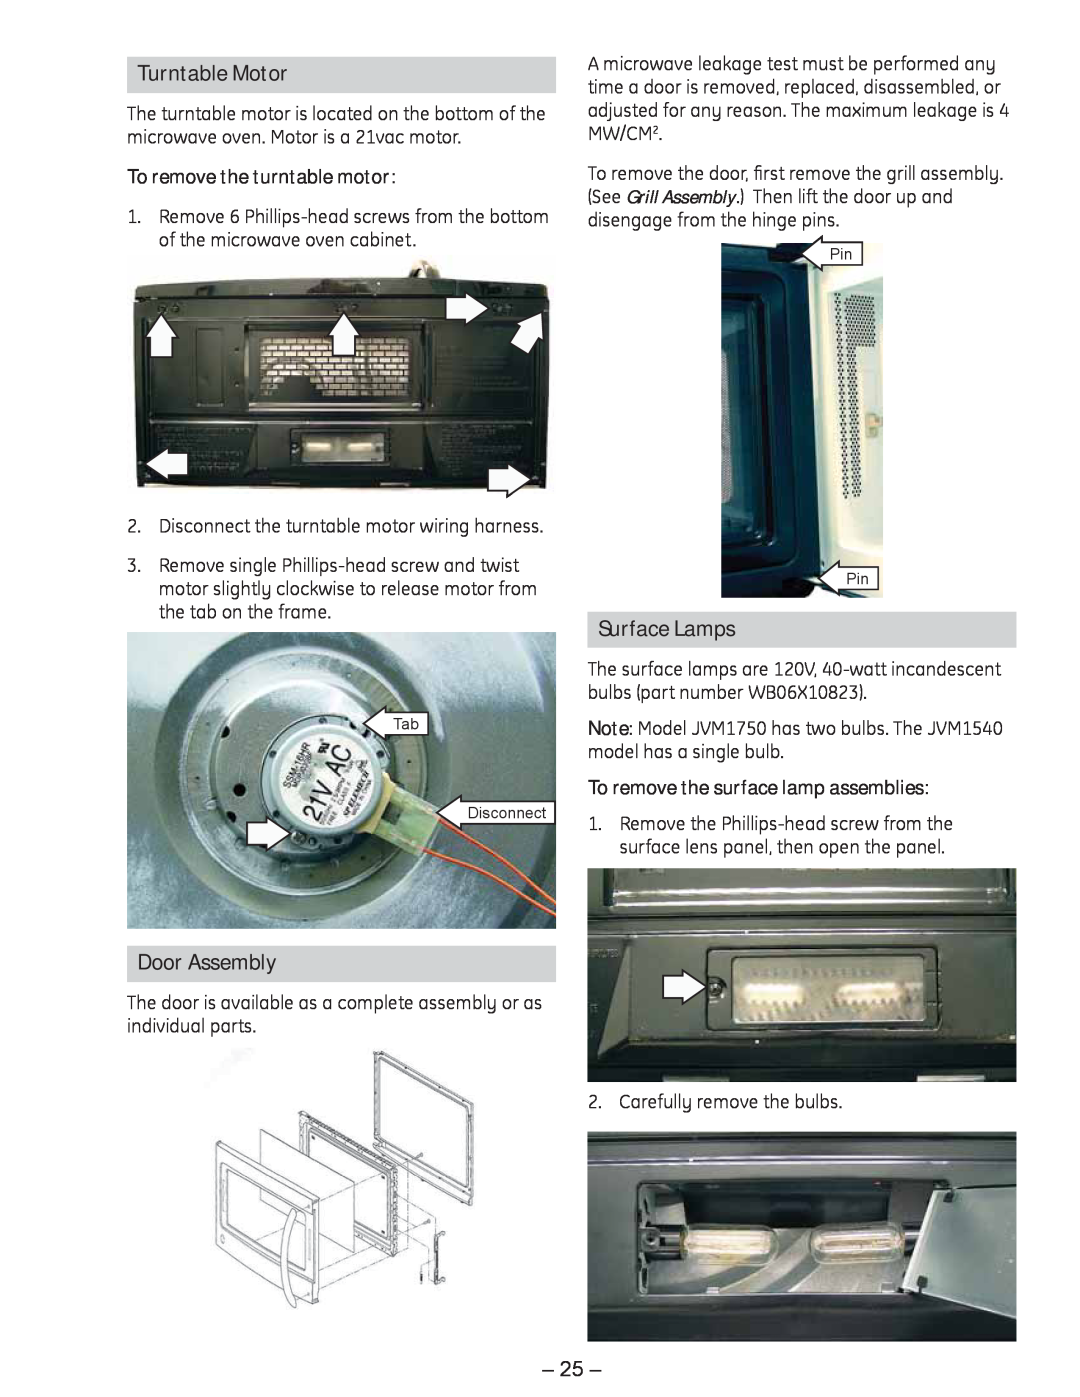 GE JVM1750 manual Turntable Motor, Surface Lamps, Door Assembly, To remove the turntable motor 